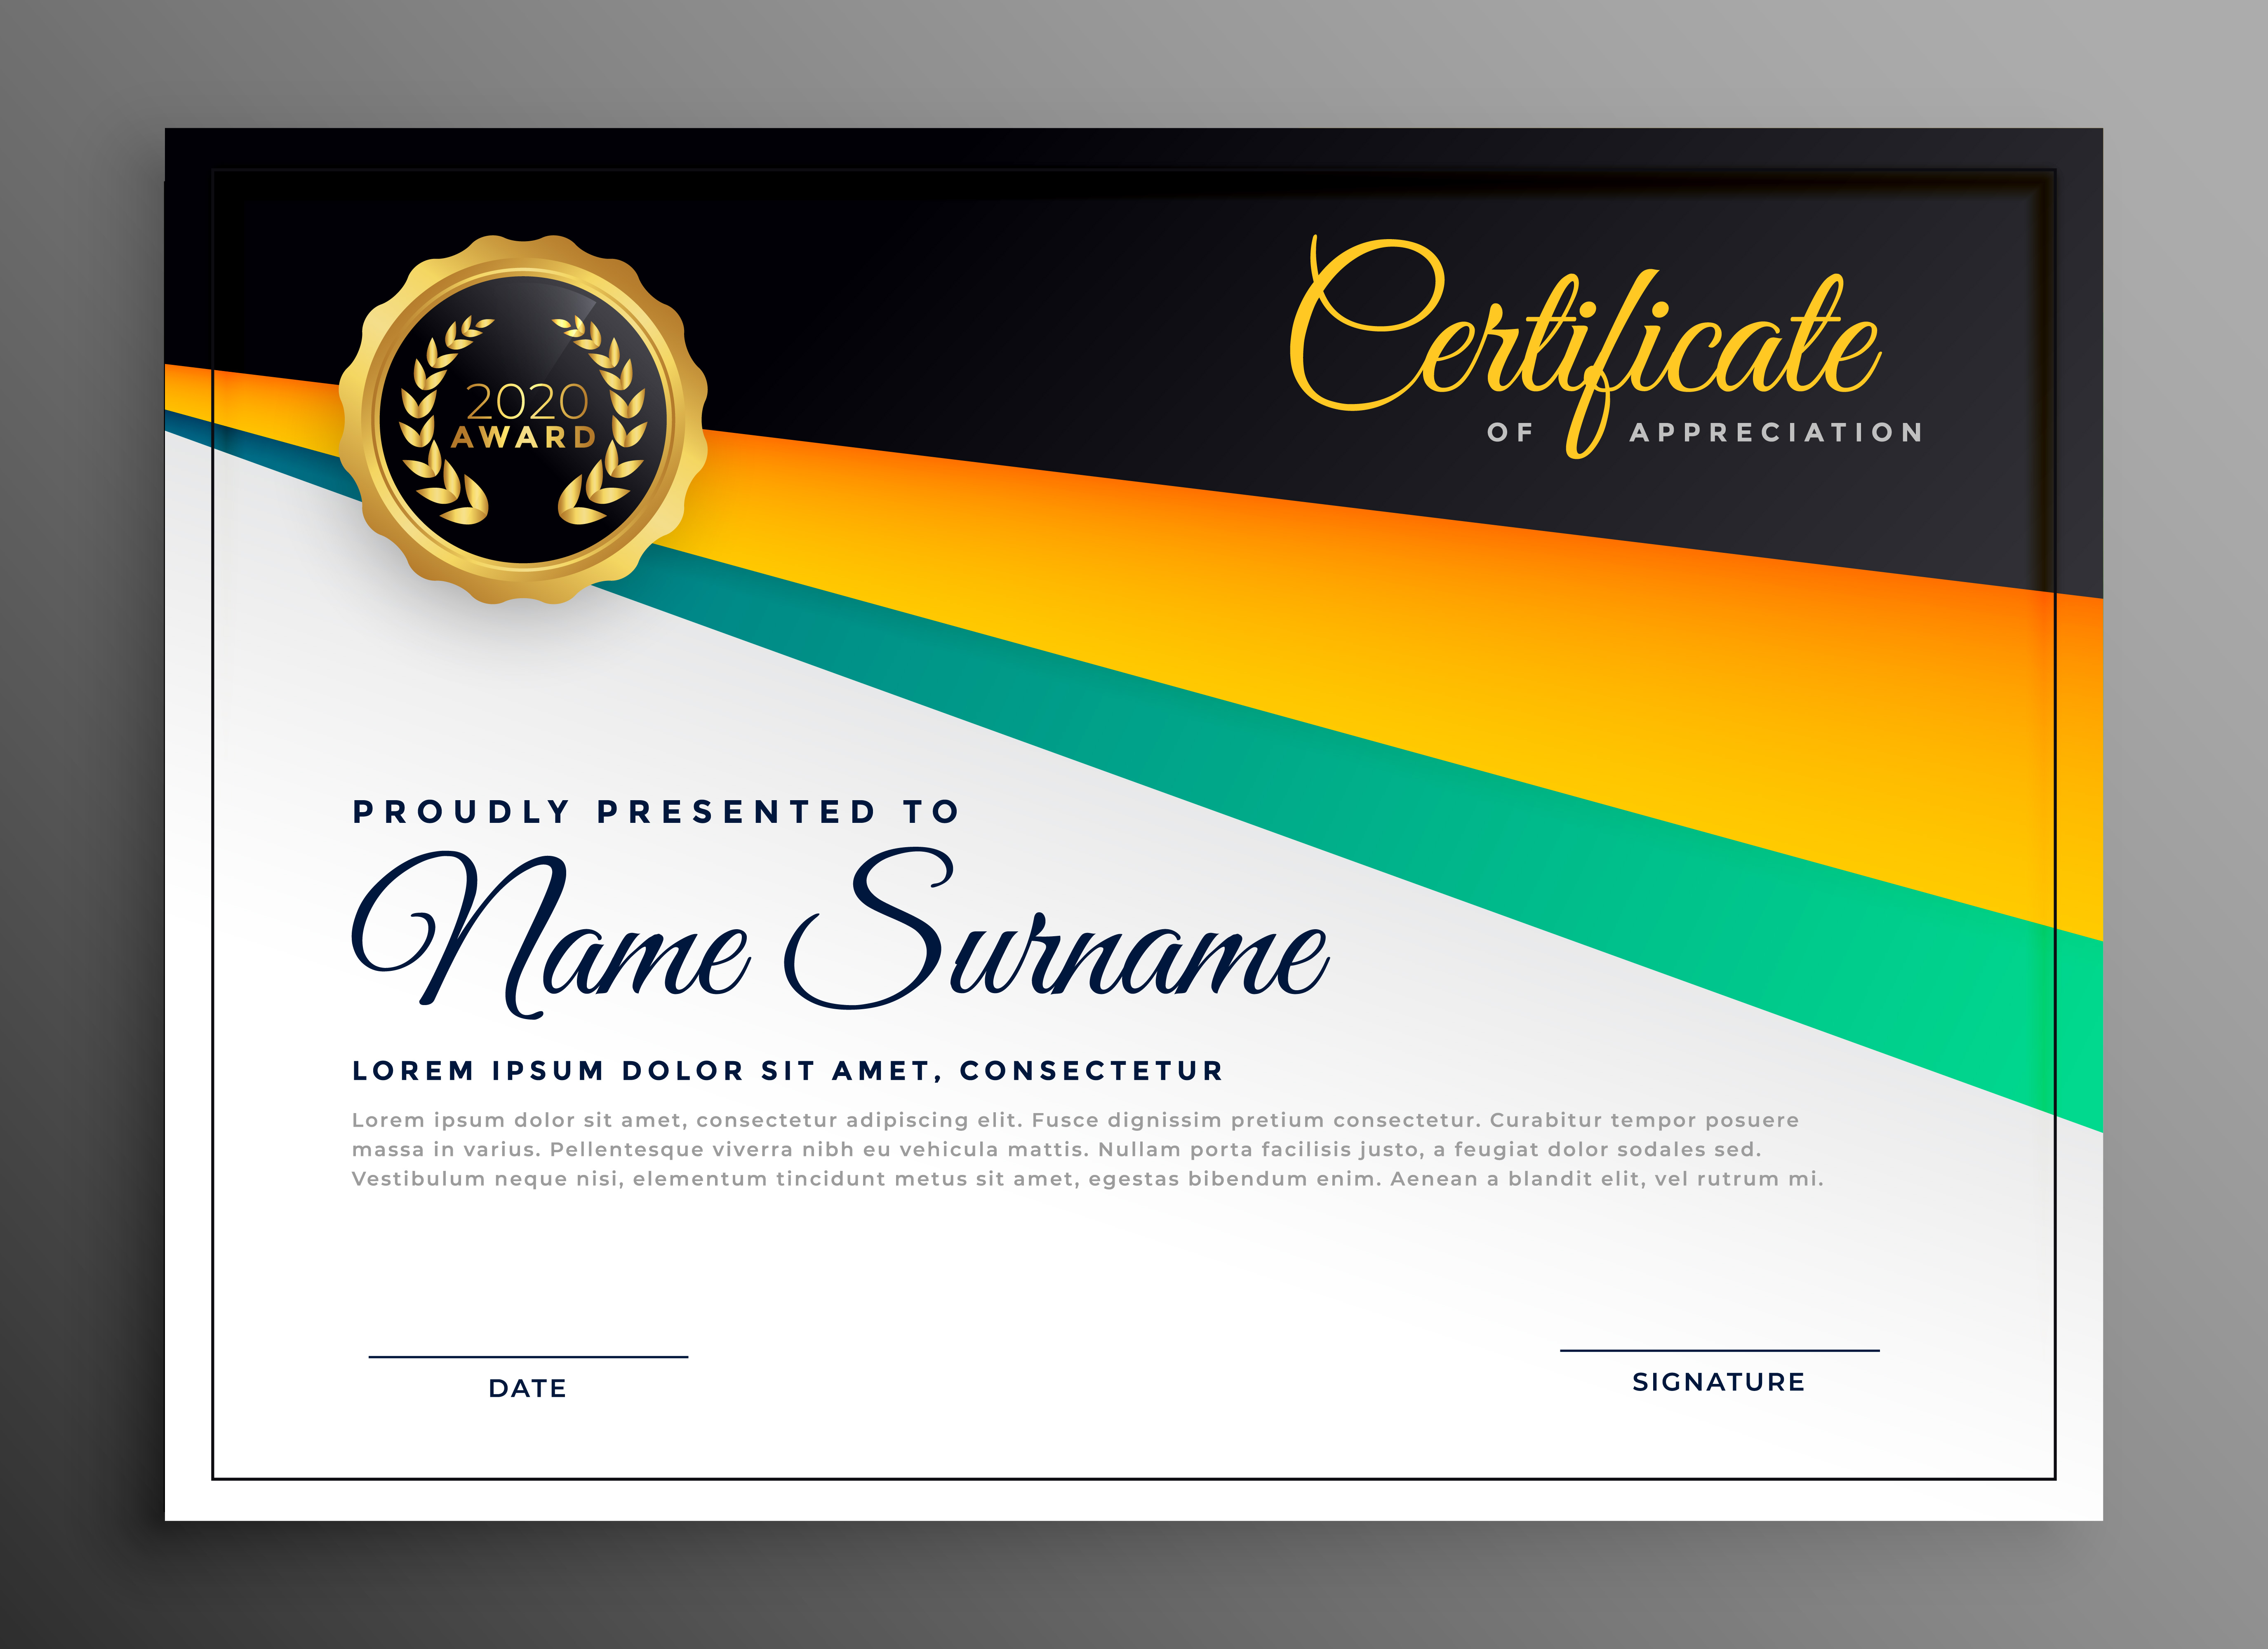 Stylish Certificate Of Appreciation Template Download Free Vector Art Stock Graphics Images